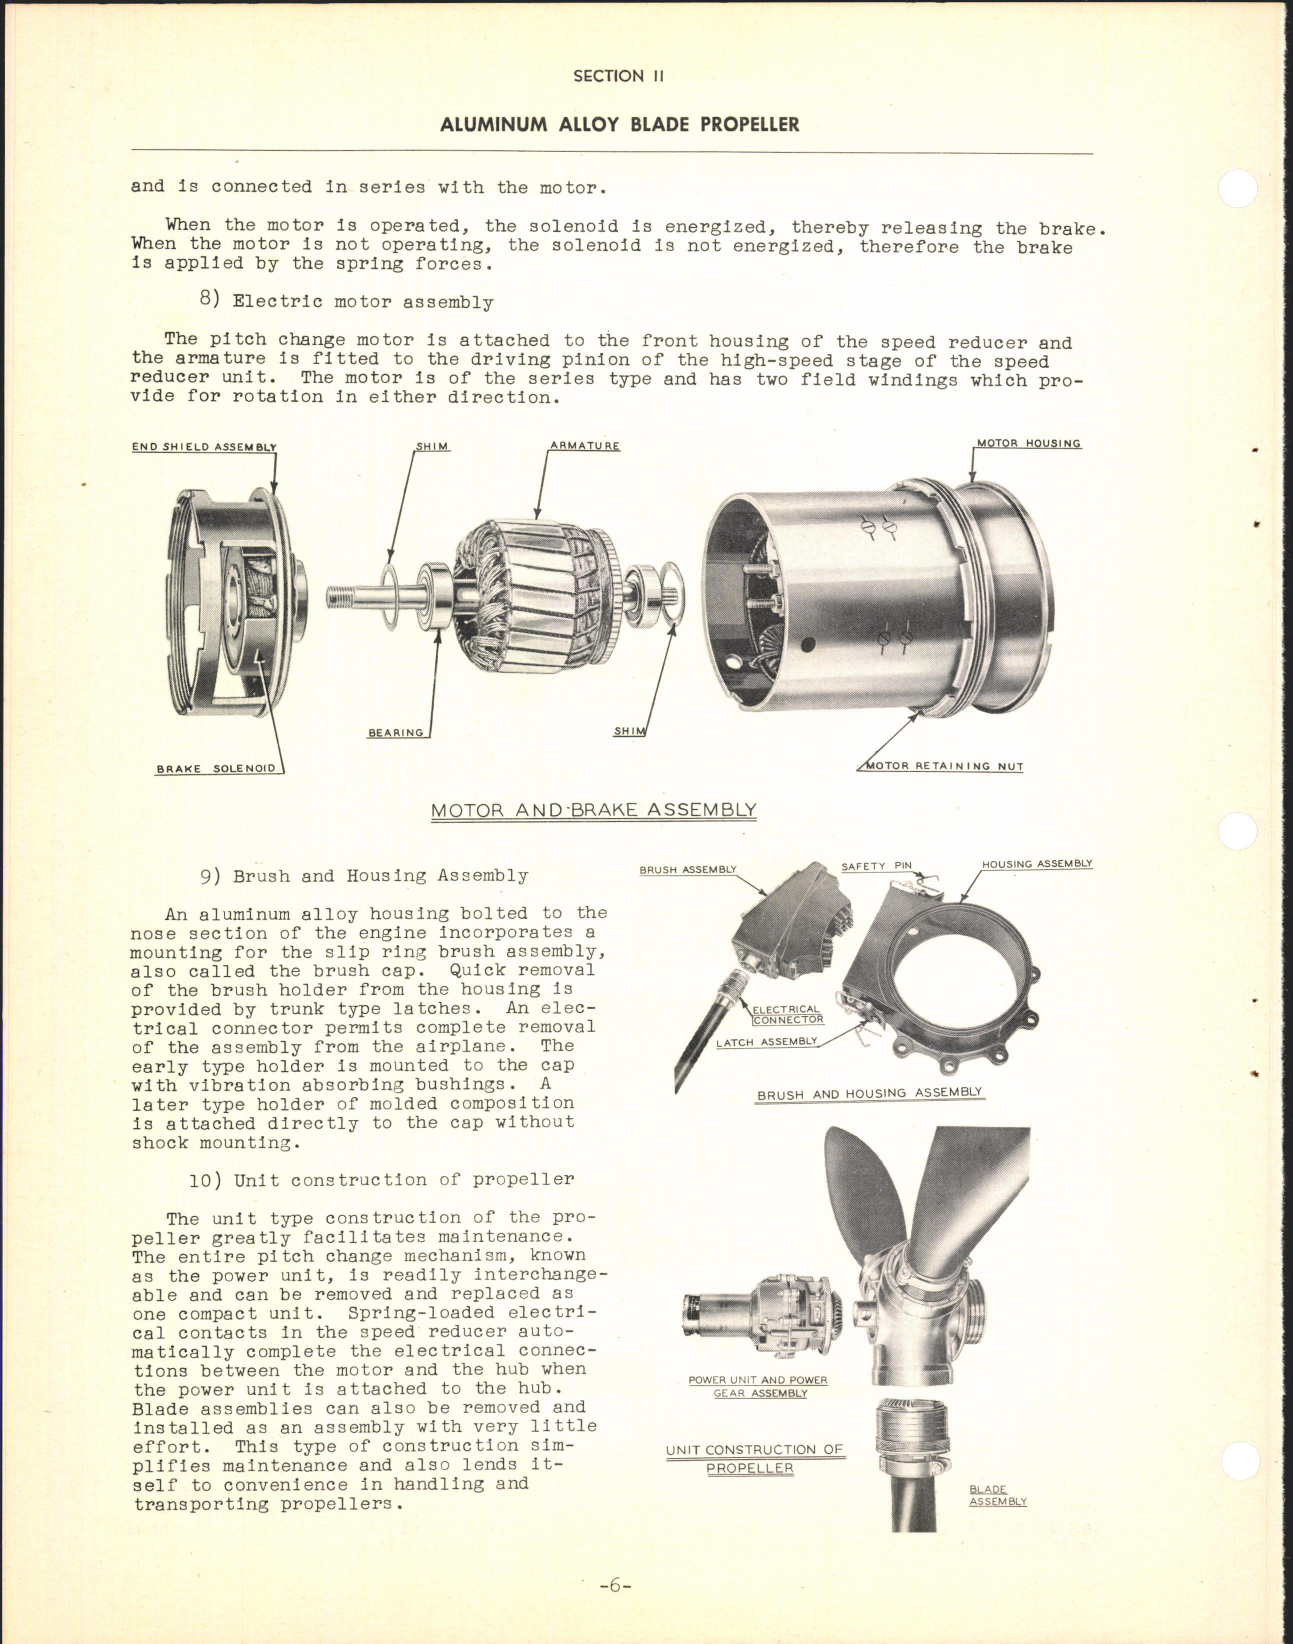 Sample page 8 from AirCorps Library document: Section 11 - Aluminum Alloy Blade Propeller (Three Blade)